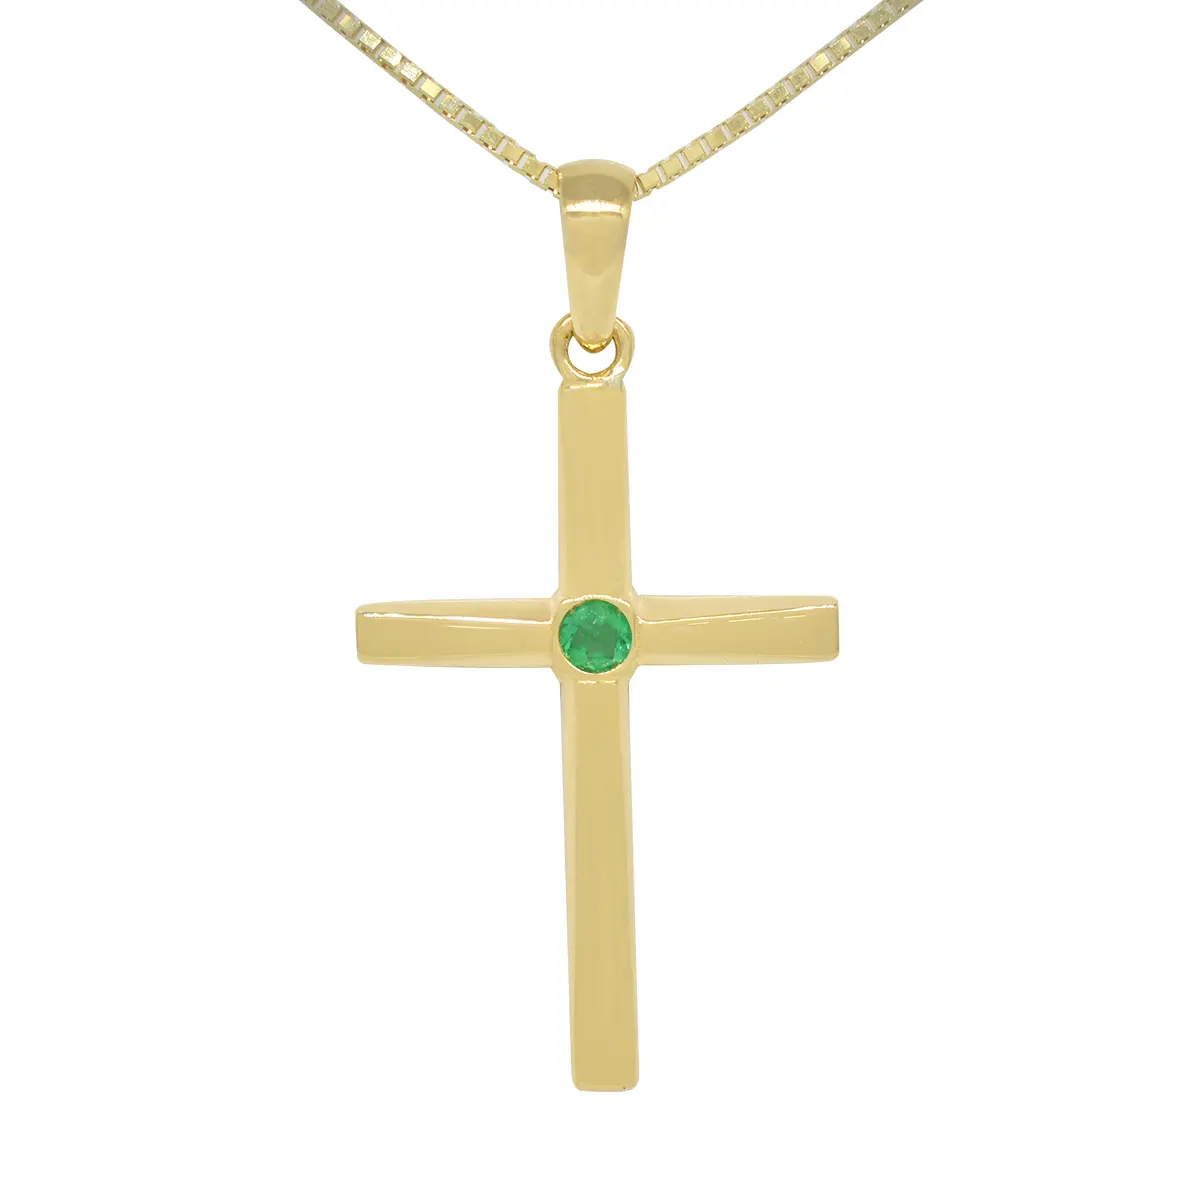 18K yellow gold cross pendant necklace with small round cut natural Colombian emerald in 0.05 Ct. weight set in the center